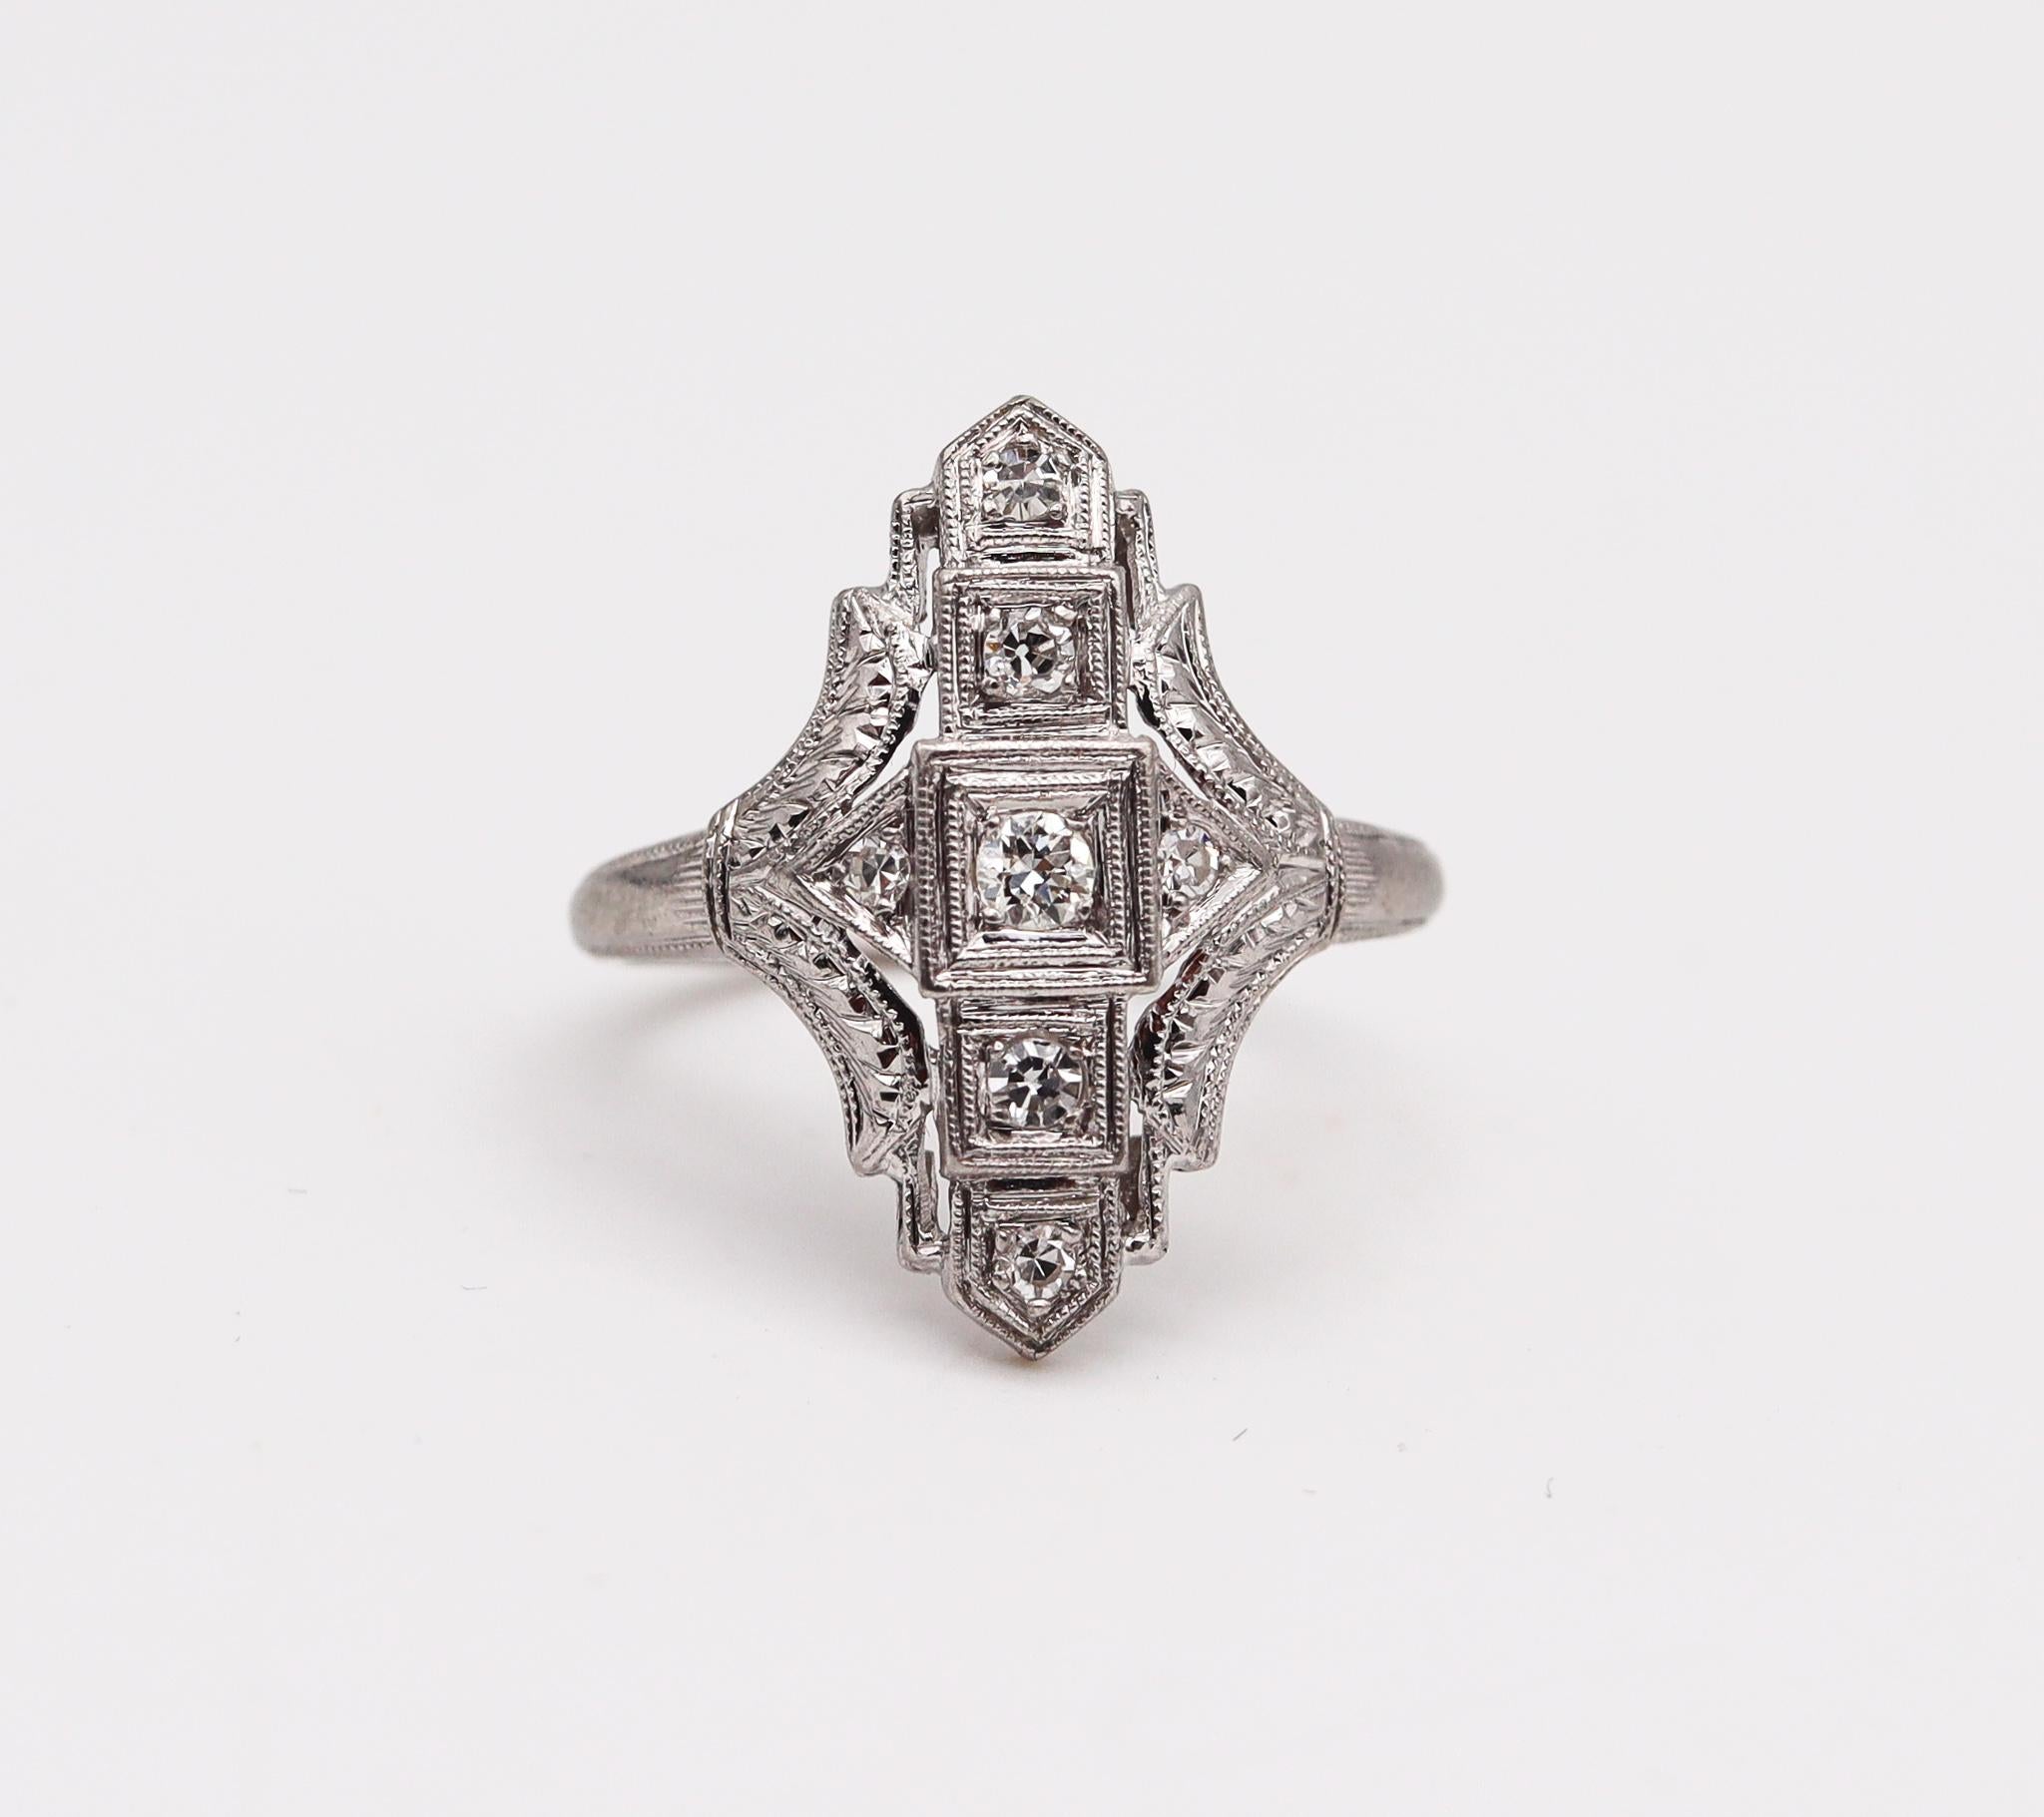 A ring designed by the Lambert Brothers.

Beautiful geometric piece, created in America by The Lambert Brothers Co during the Art deco period, back in the 1922. This delicate ring was crafted in solid white gold of 18 karats with the surfaces